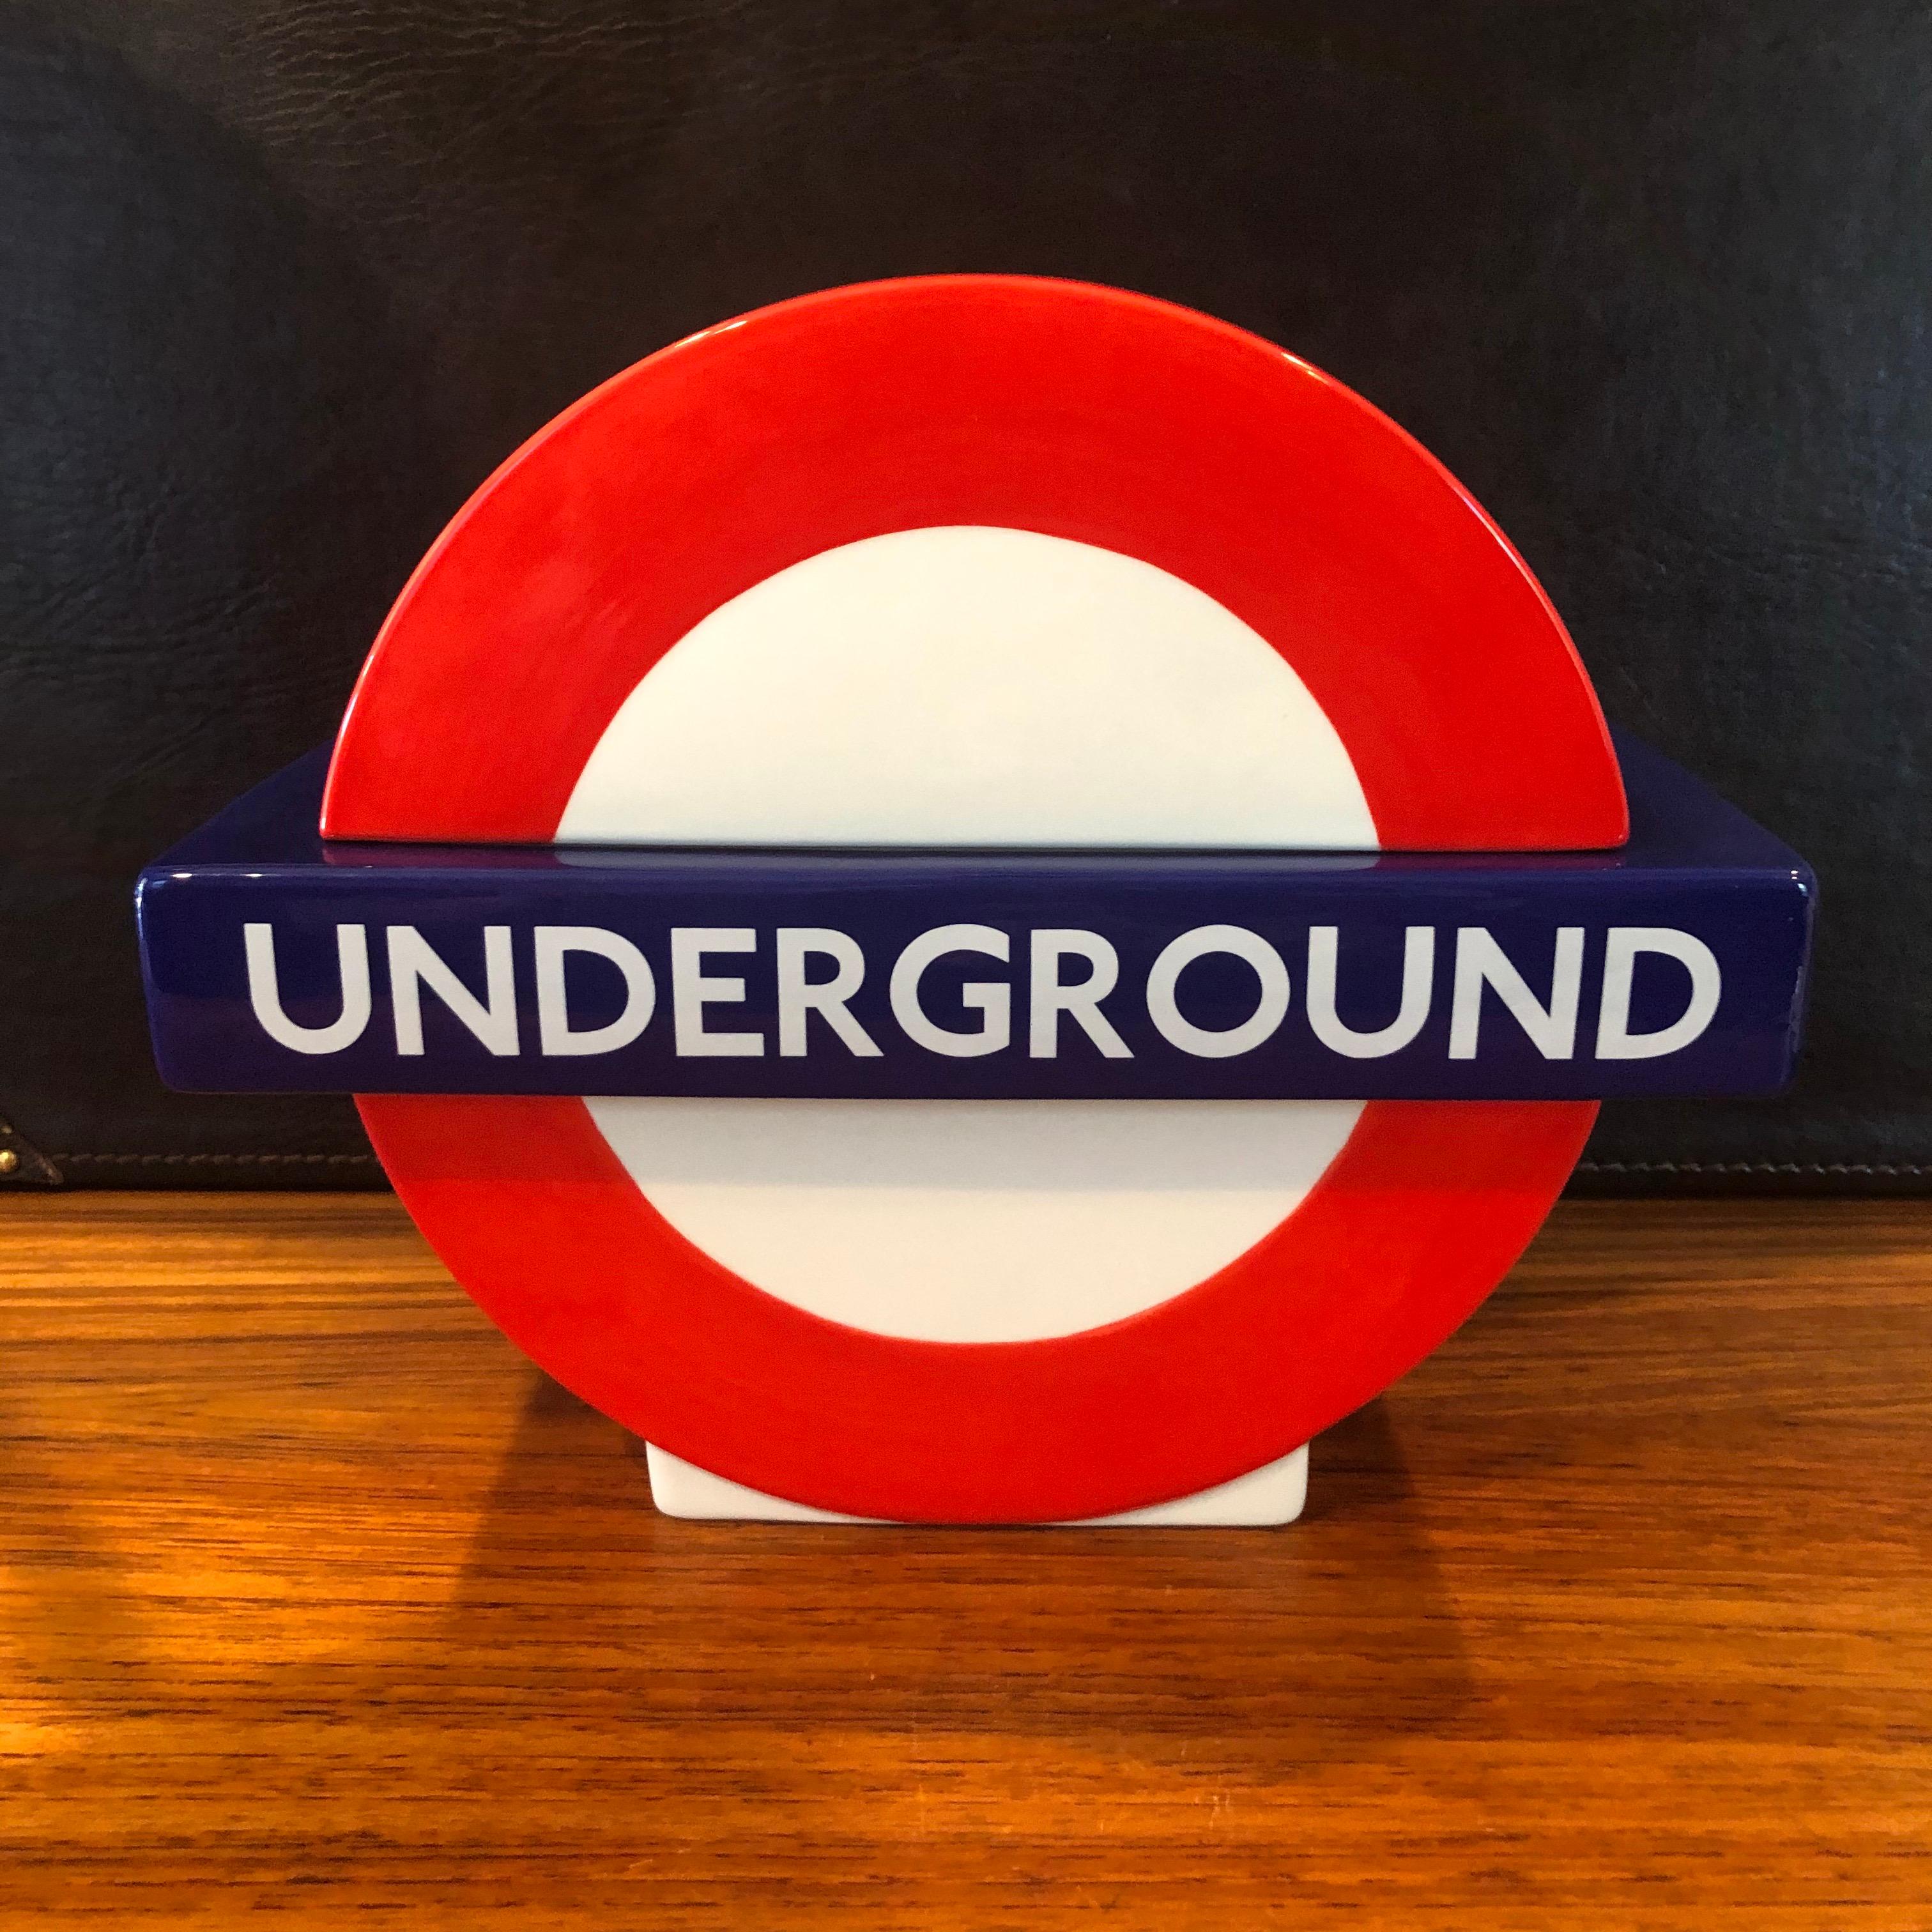 A very cool and hard to find London, England Underground ceramic cookie jar, circa 1980s. The piece is in excellent condition with no chips, cracks or crazing.